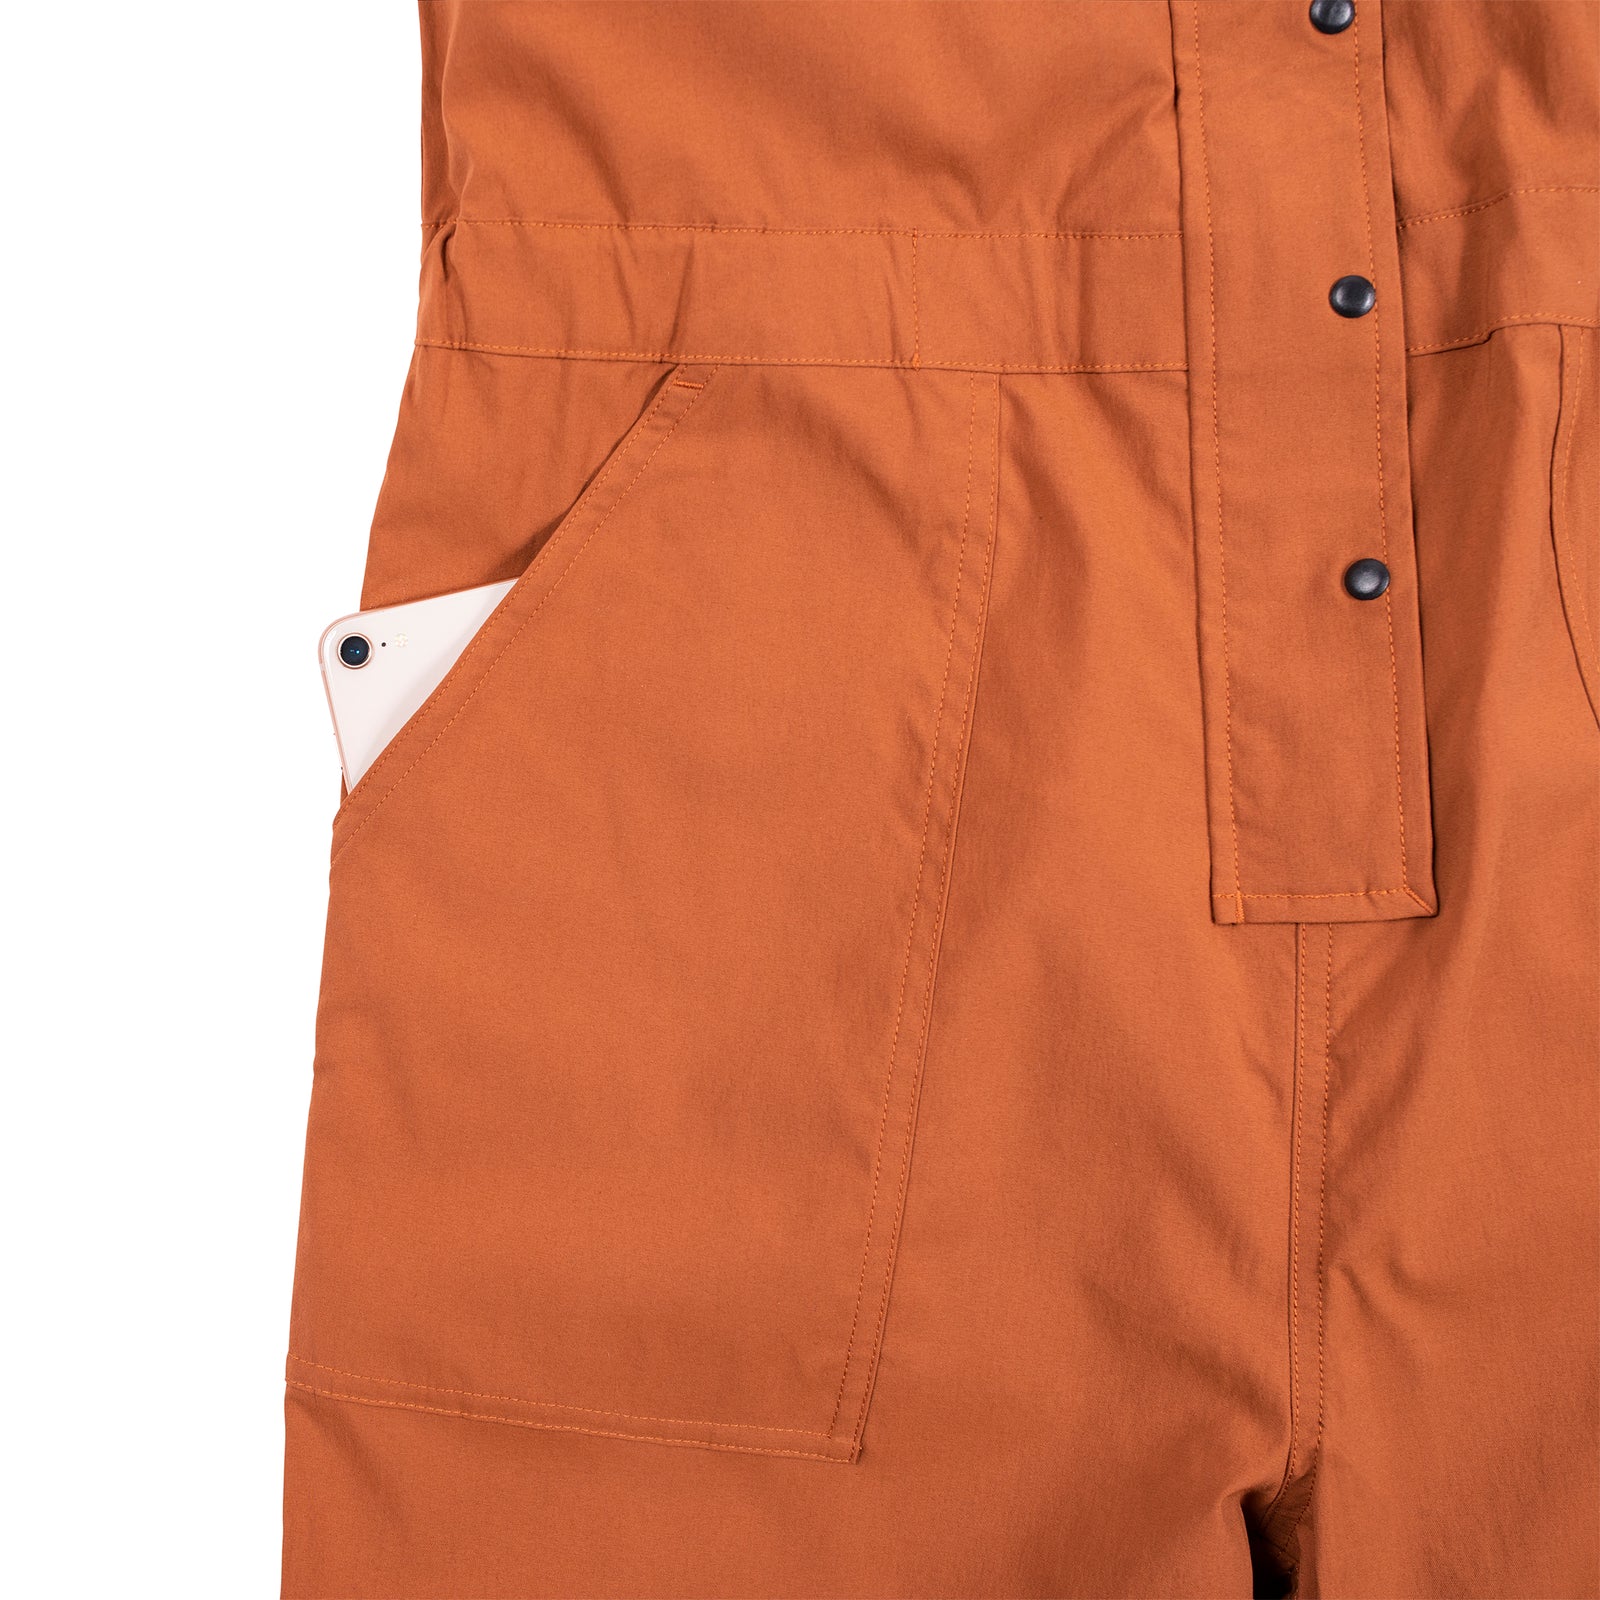 General detail shot of the Topo Designs Women's Coverall in Brick showing front hand pockets.